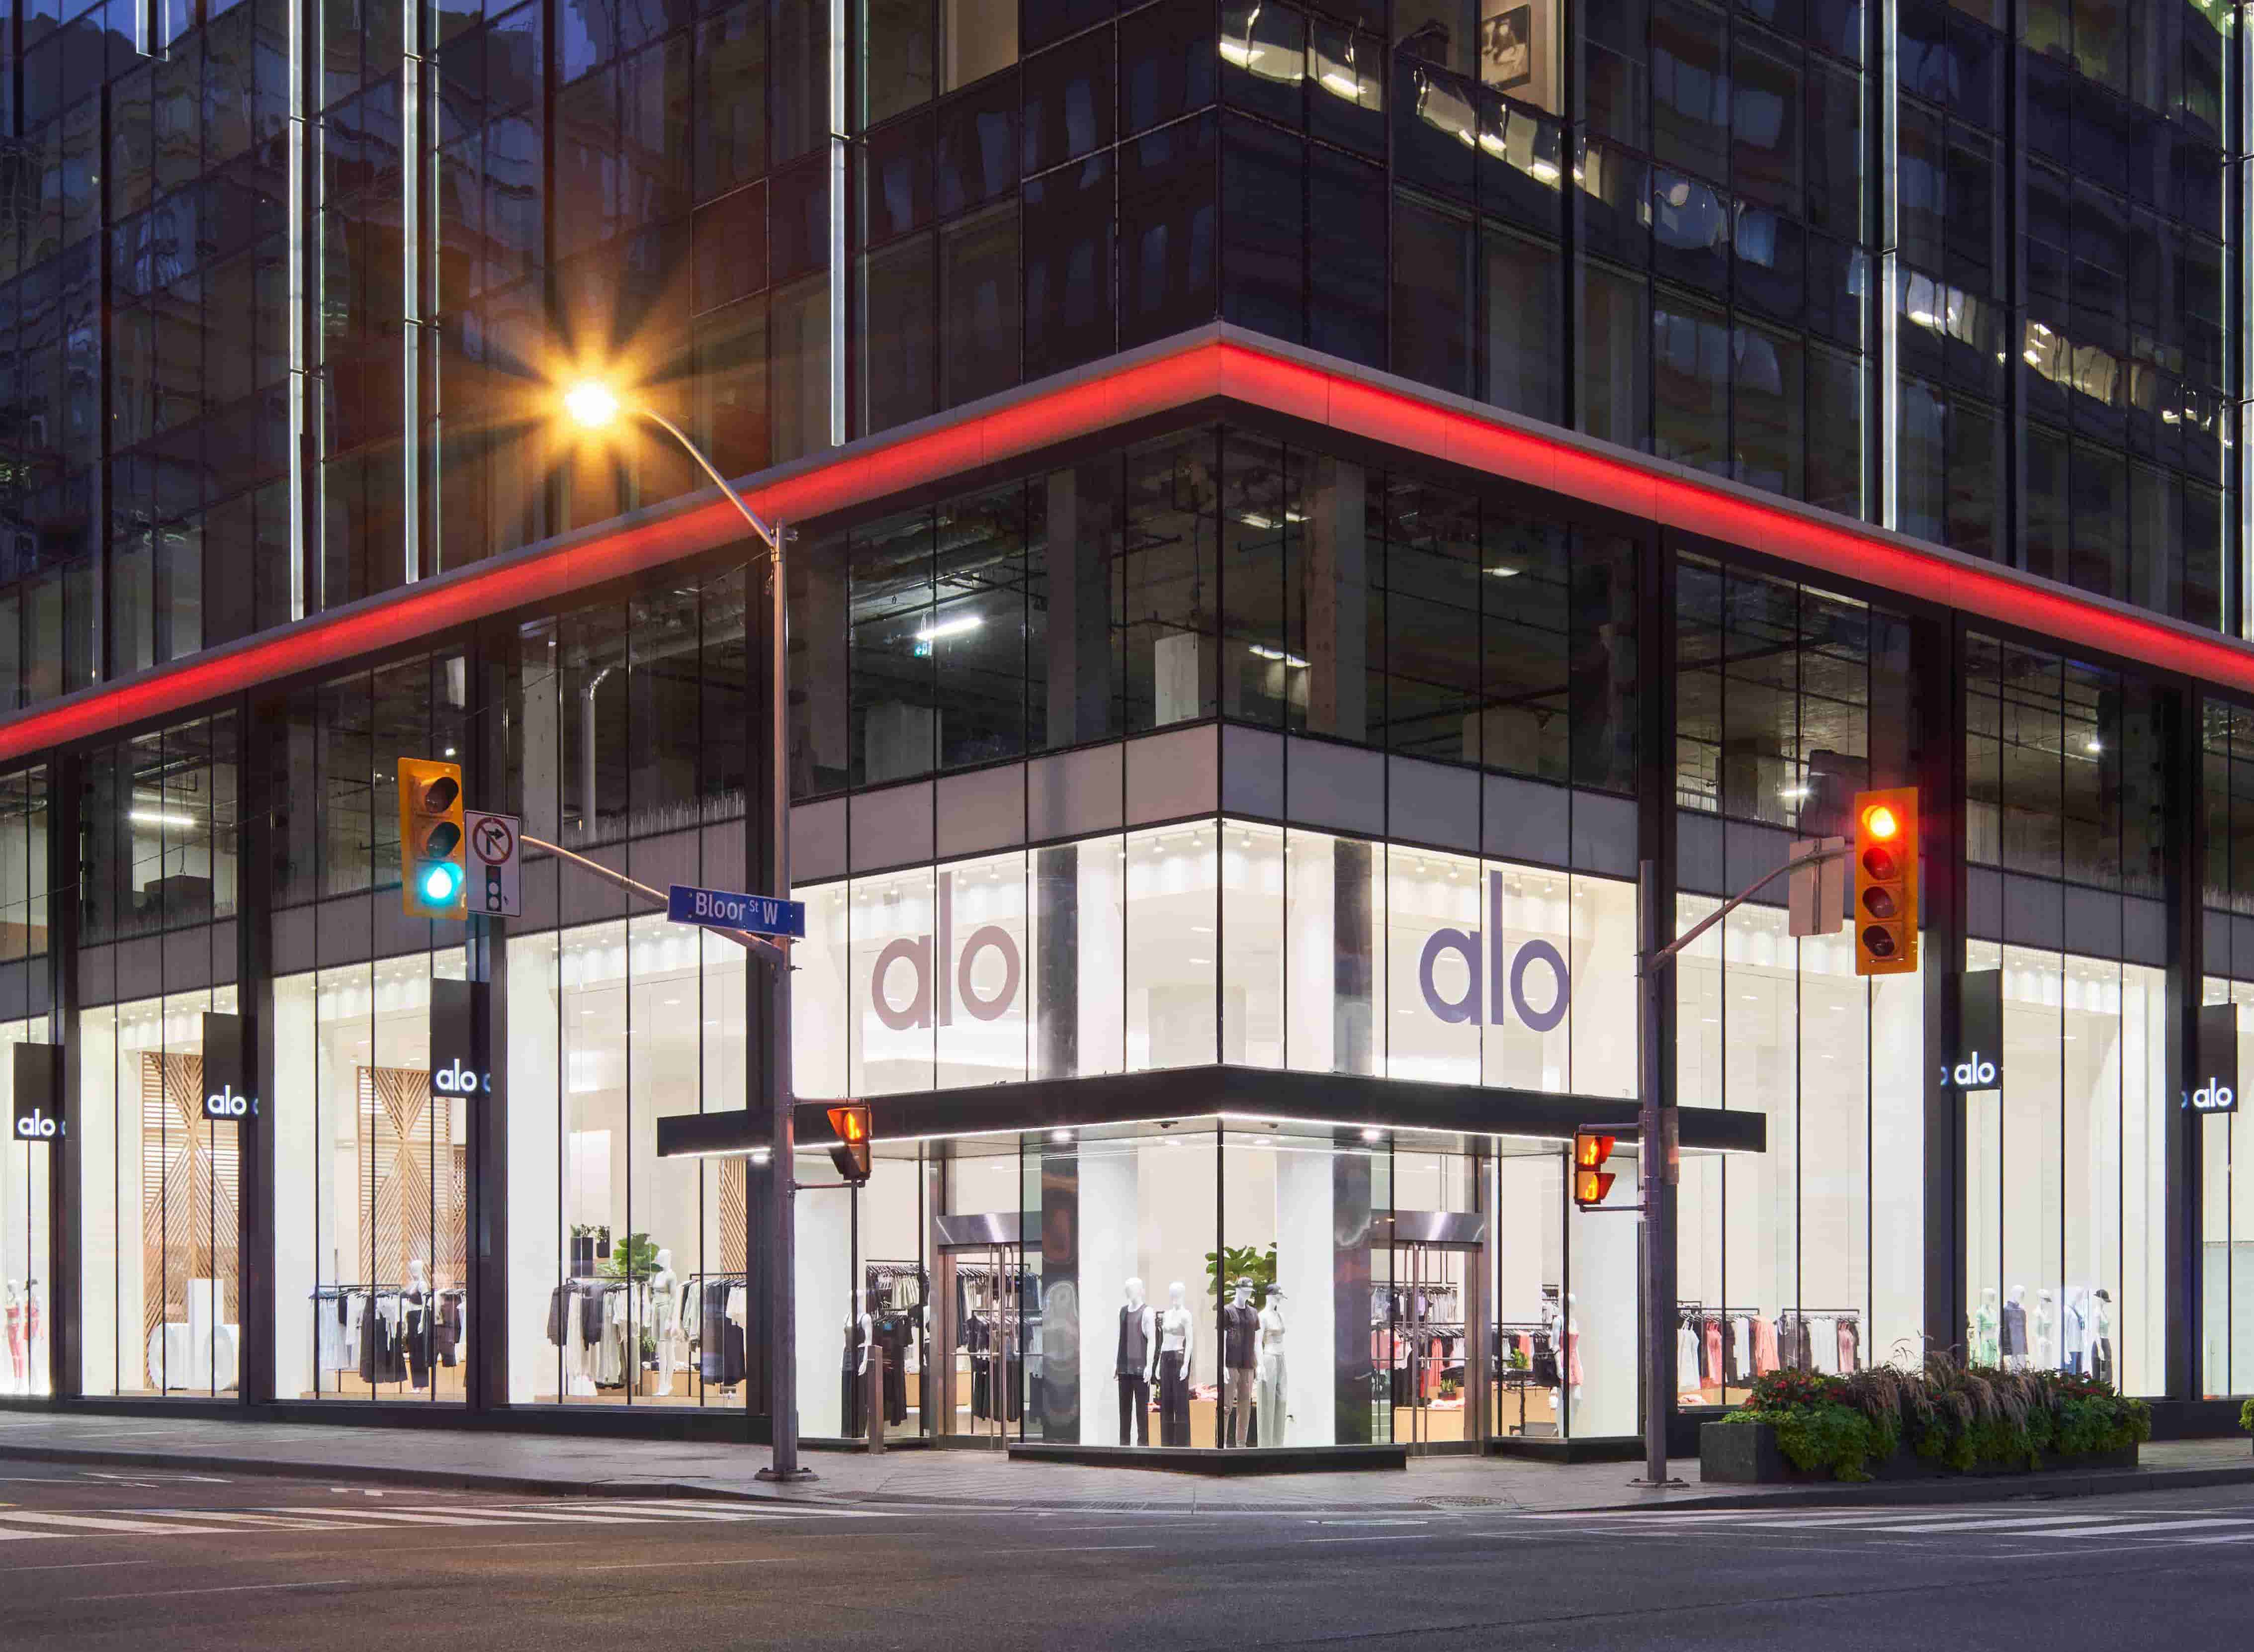 A photo of the Alo Yoga Storefront in Toronto showcasing the large floor-to-ceiling windows of this corner intersection store.  